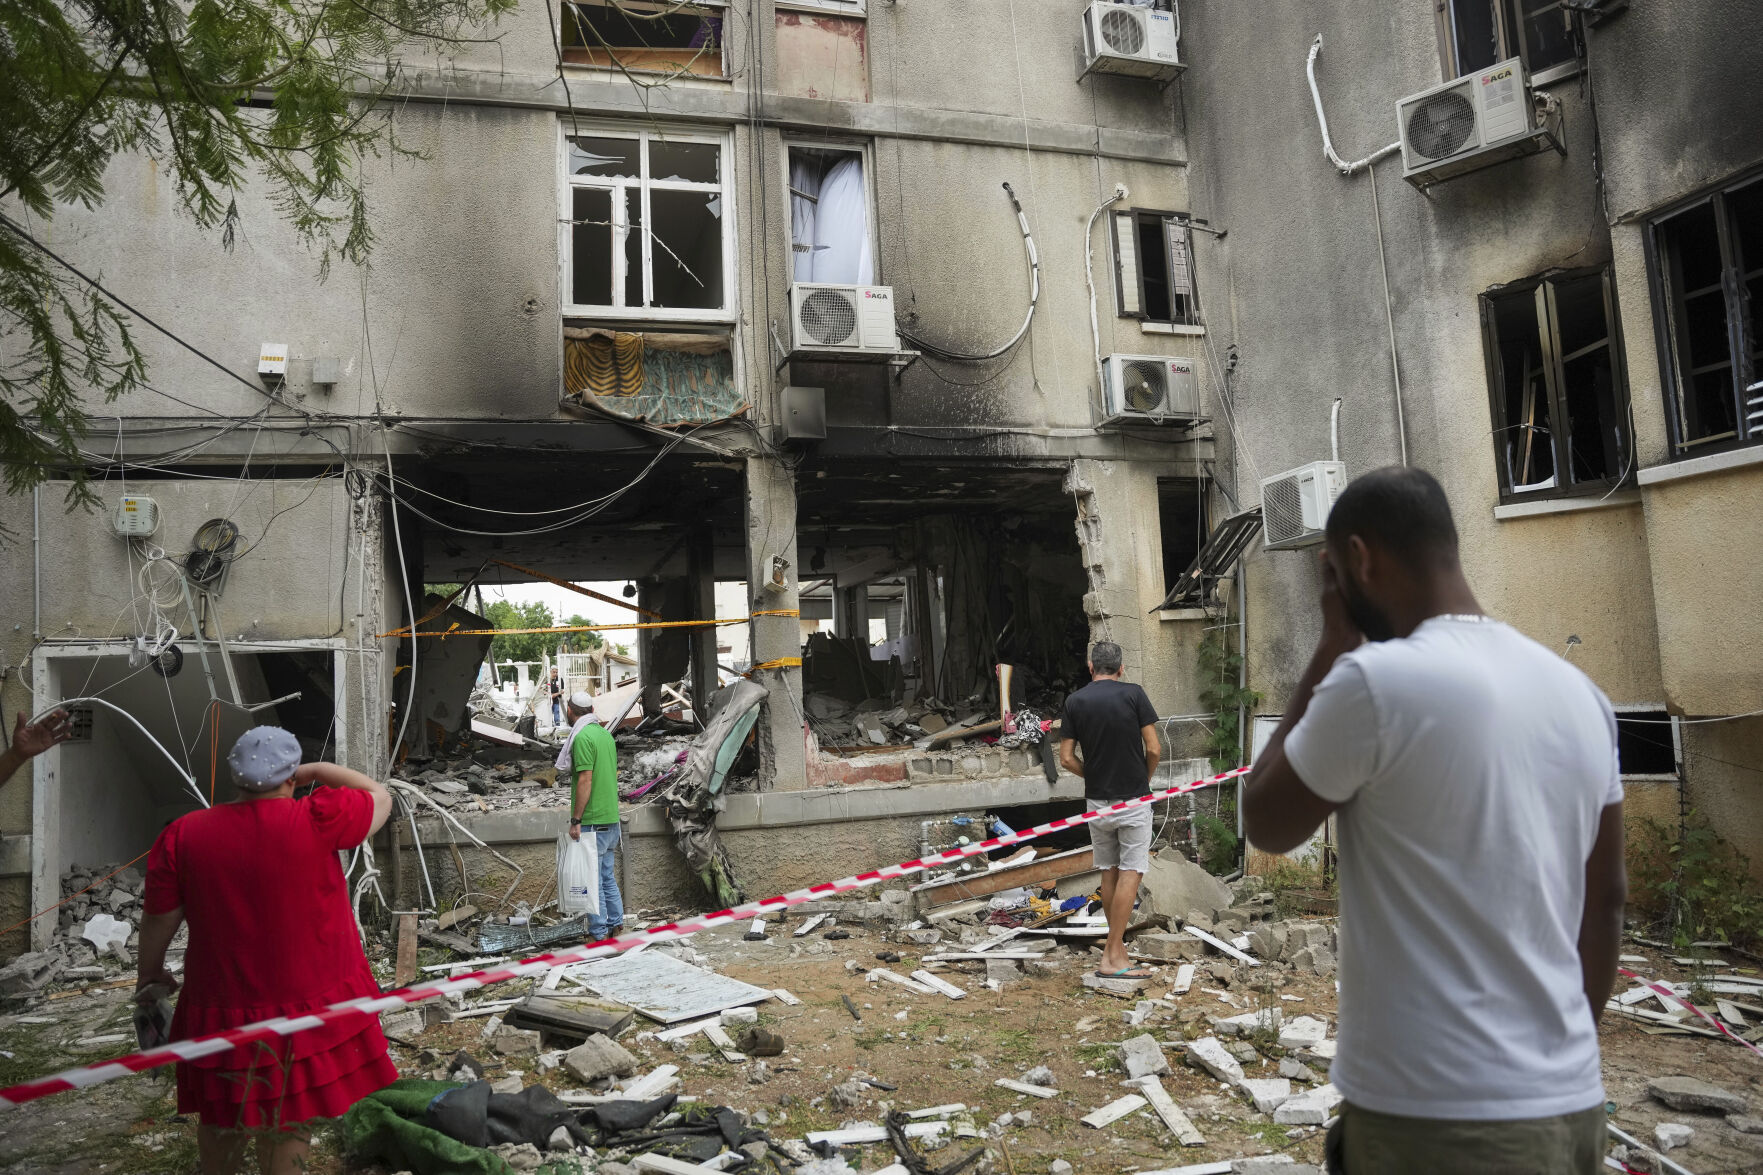 <p>Israelis inspect a damaged residential building after it was hit by a rocket fired from the Gaza Strip, in Ashkelon, Israel, Monday, Oct. 9, 2023. The militant Hamas rulers of the Gaza Strip carried out an unprecedented, multi-front attack on Israel at daybreak Saturday, firing thousands of rockets as dozens of Hamas fighters infiltrated the heavily fortified border in several locations by air, land, and sea, killing hundreds and taking captives. Palestinian health officials reported scores of deaths from Israeli airstrikes in Gaza. (AP Photo/Erik Marmor)</p>   PHOTO CREDIT: Erik Marmor - stringer, ASSOCIATED PRESS